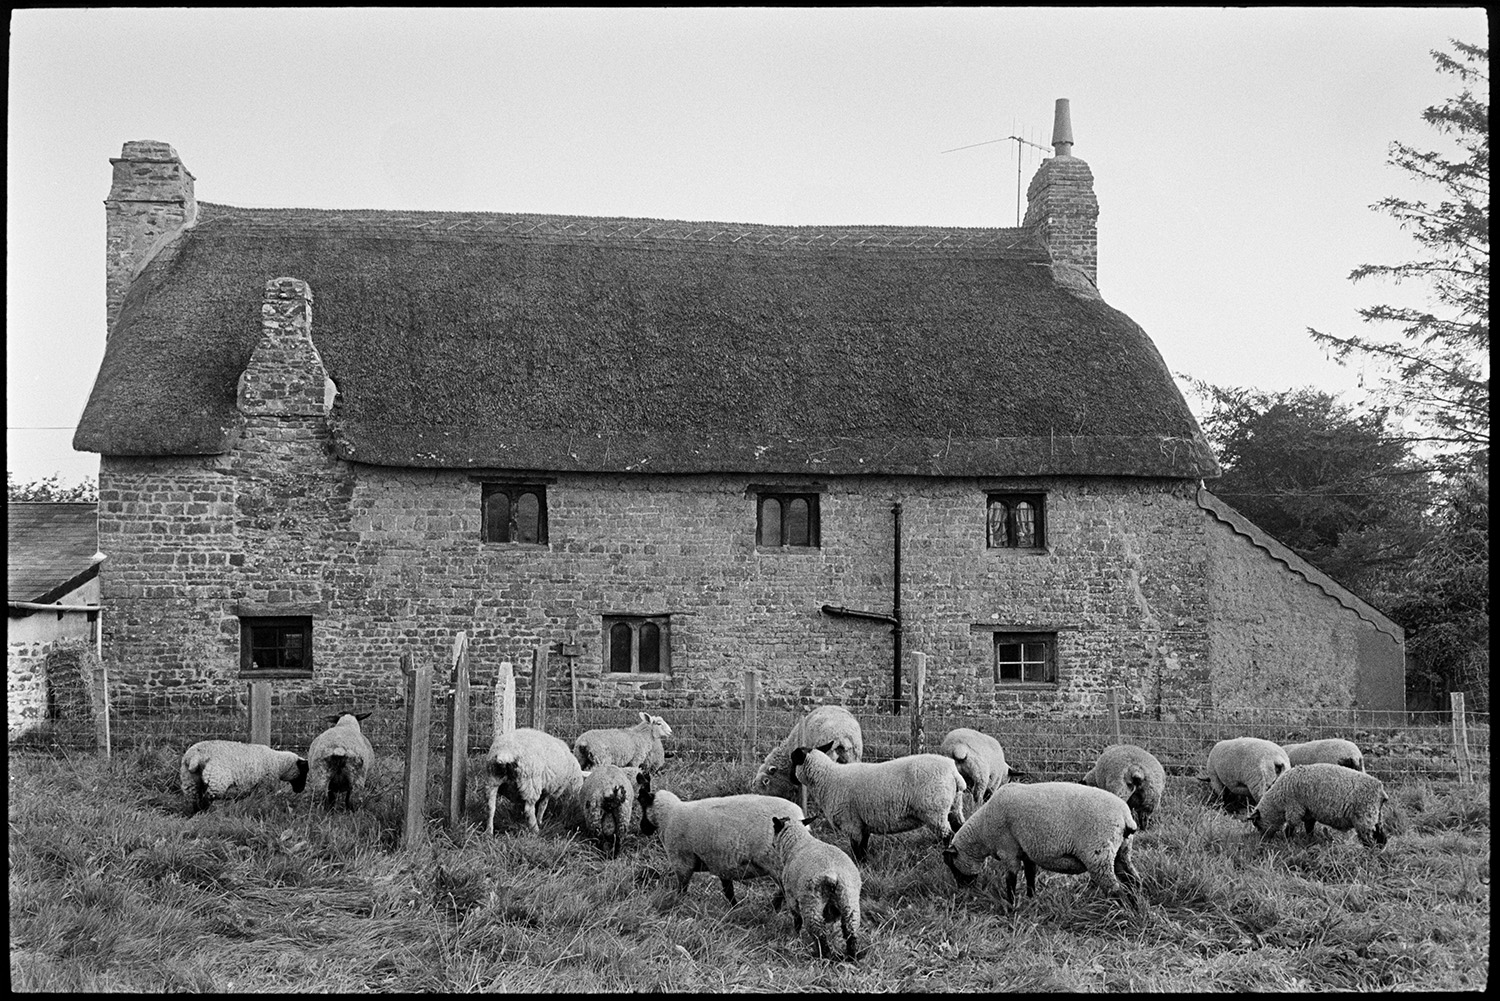 Sheep grazing amongst gravestones in Dowland churchyard. A thatched cottage can be seen behind the graveyard.